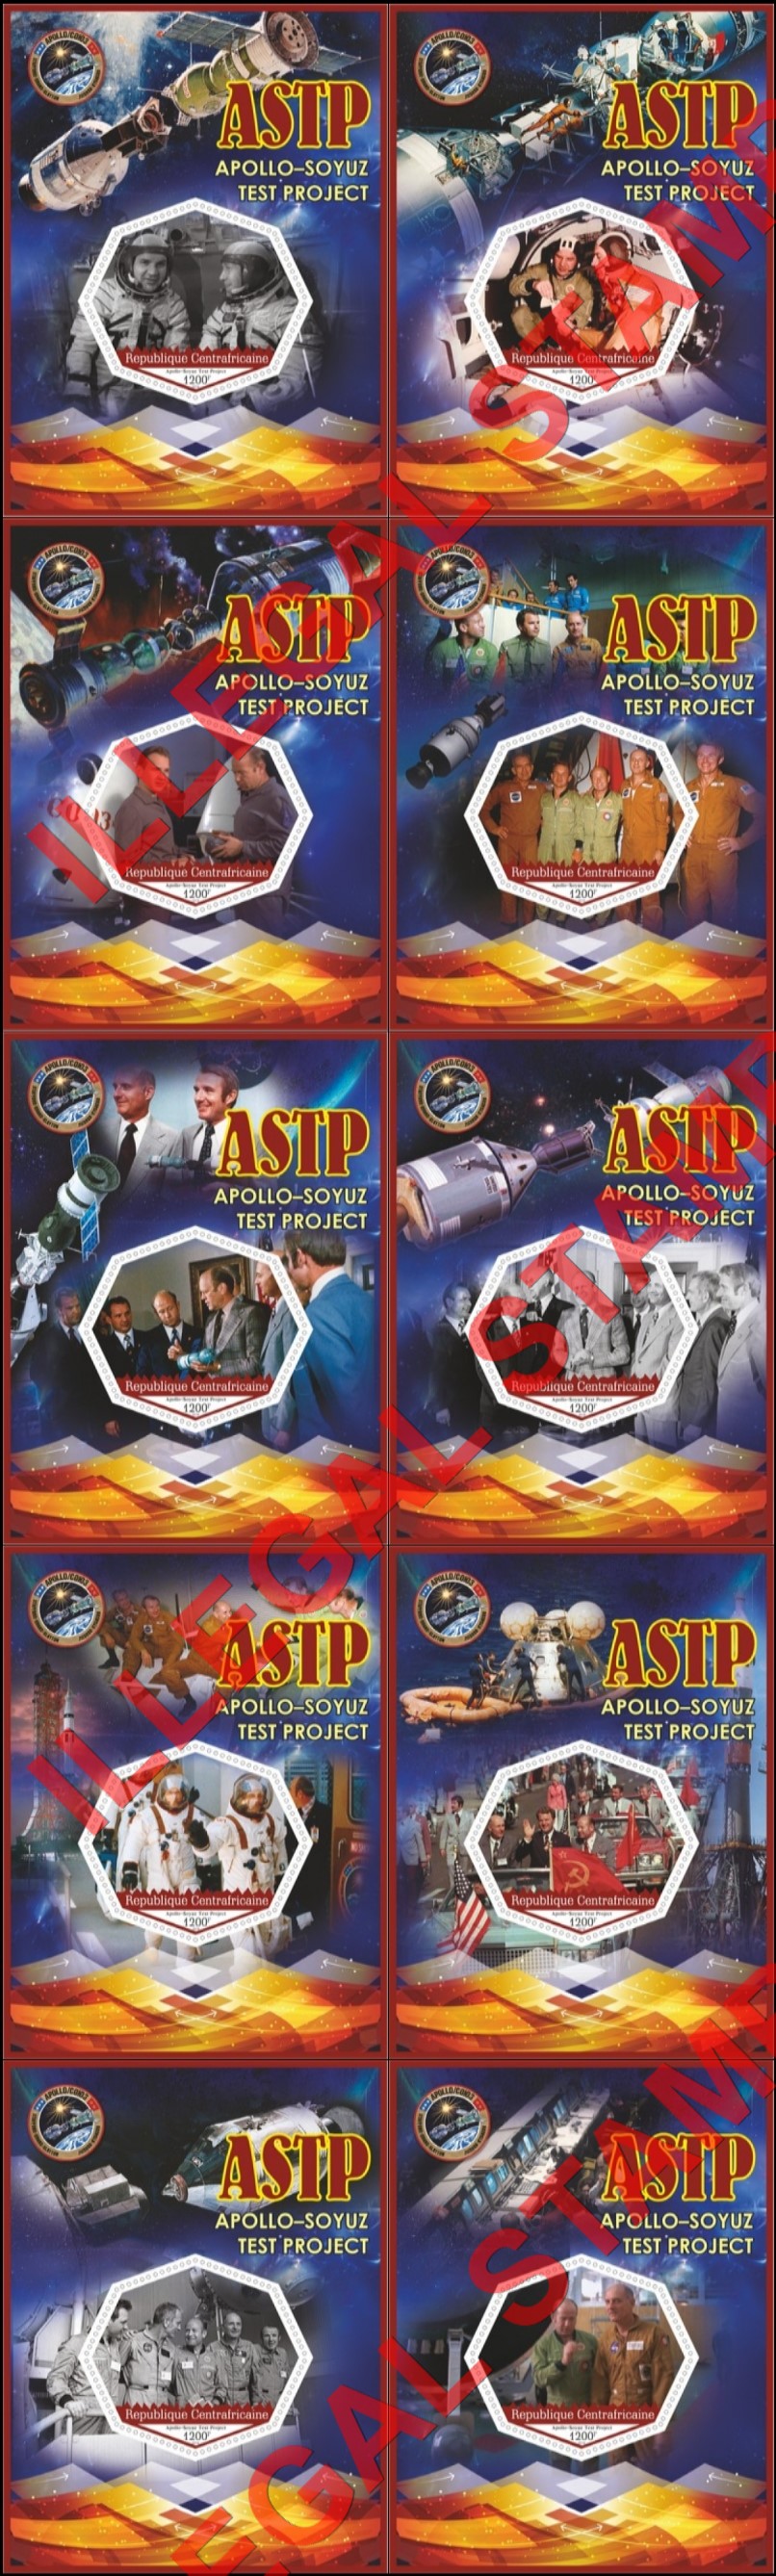 Central African Republic 2018 Space Apollo Soyuz Test Project ASTP Illegal Stamp Souvenir Sheets of 1